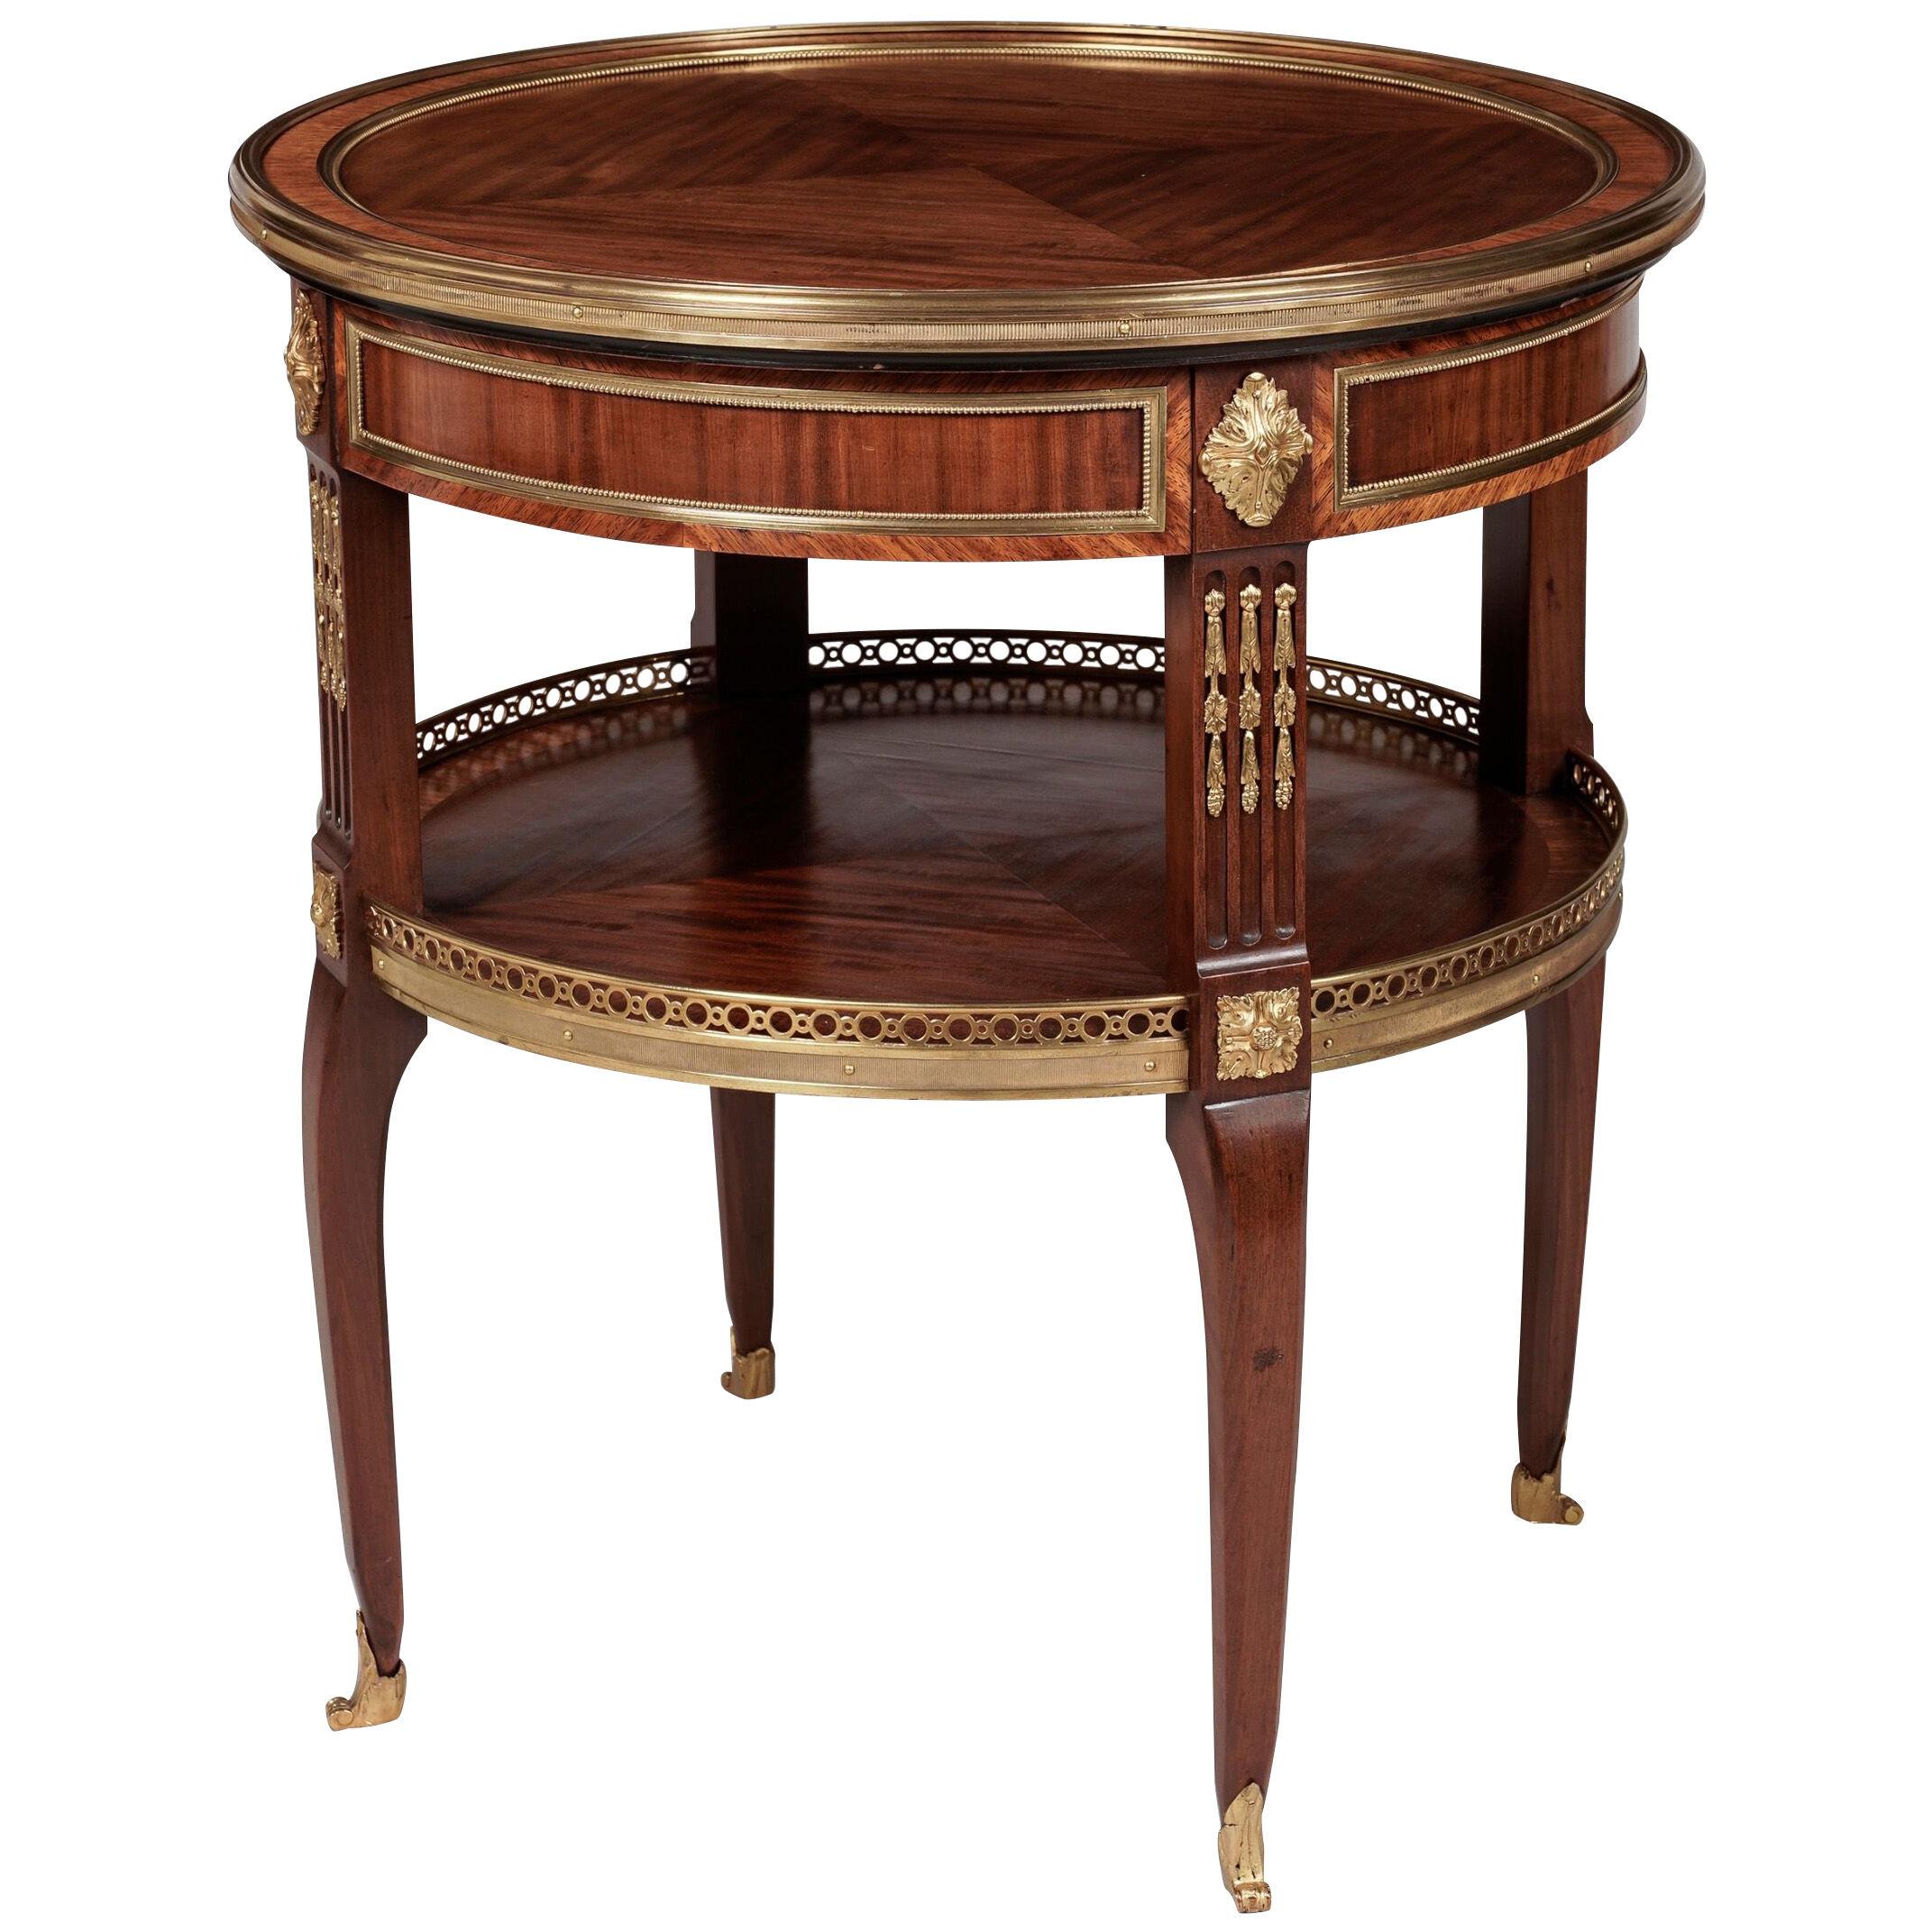 A Fine Louis XVI Style Occasional Table